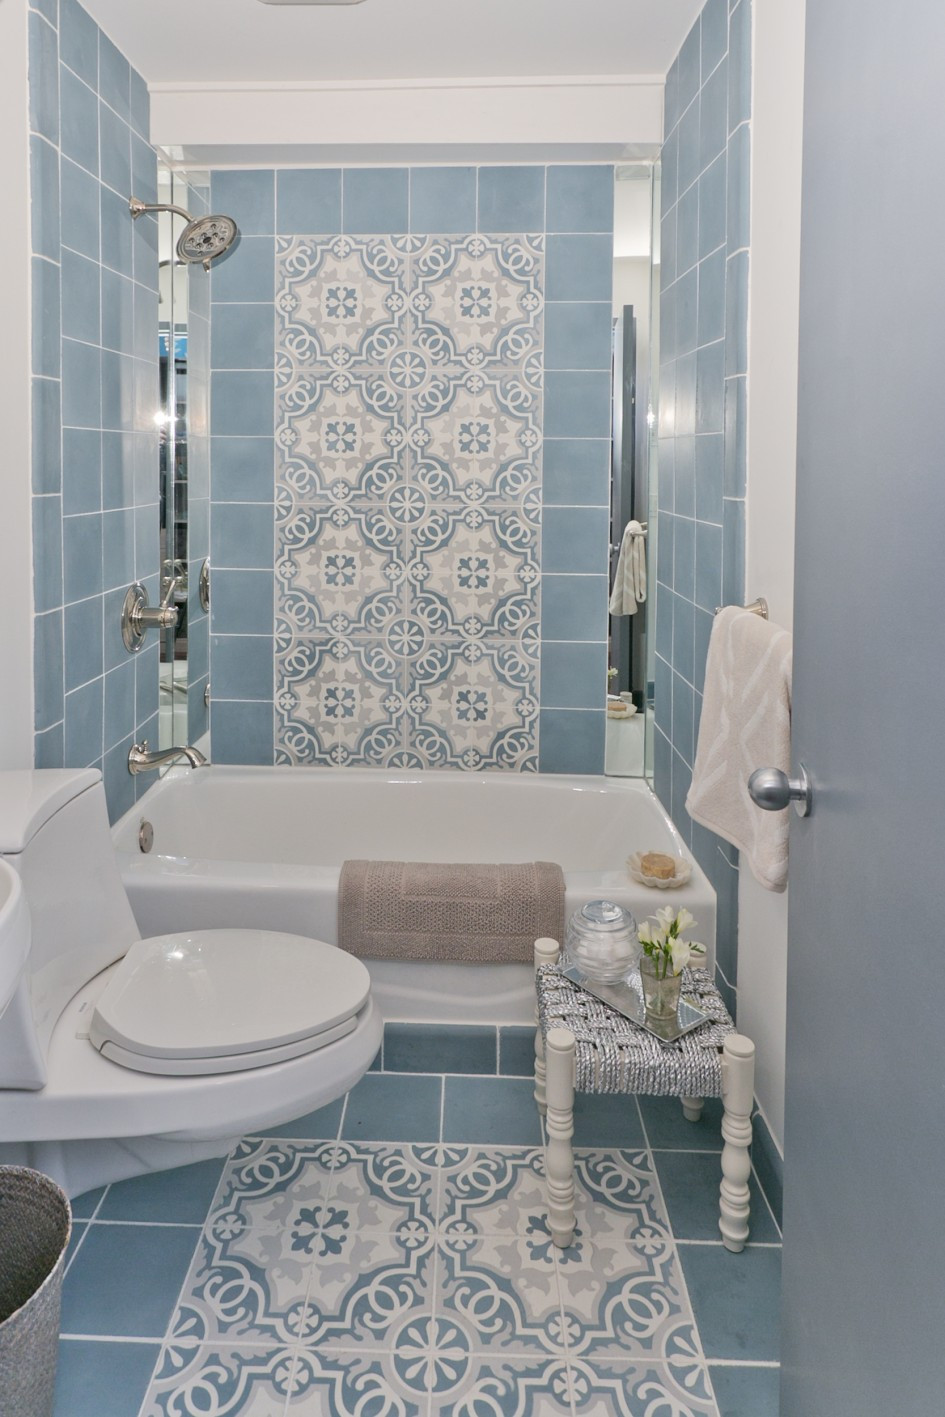 Bathroom Tiles Designs
 30 great pictures and ideas of old fashioned bathroom tile